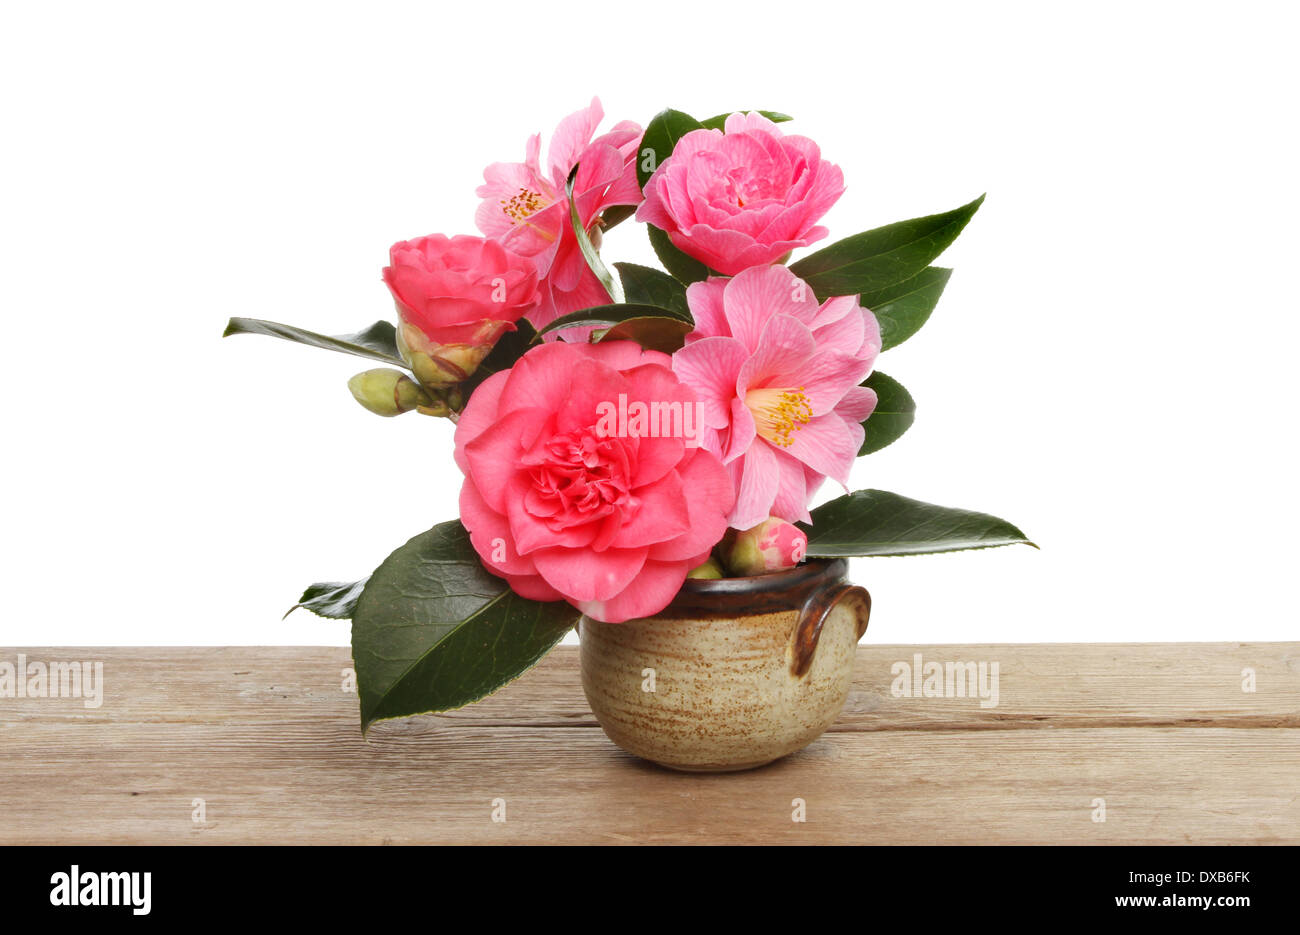 Arrangement of camellia flowers on a rustic wooden table Stock Photo